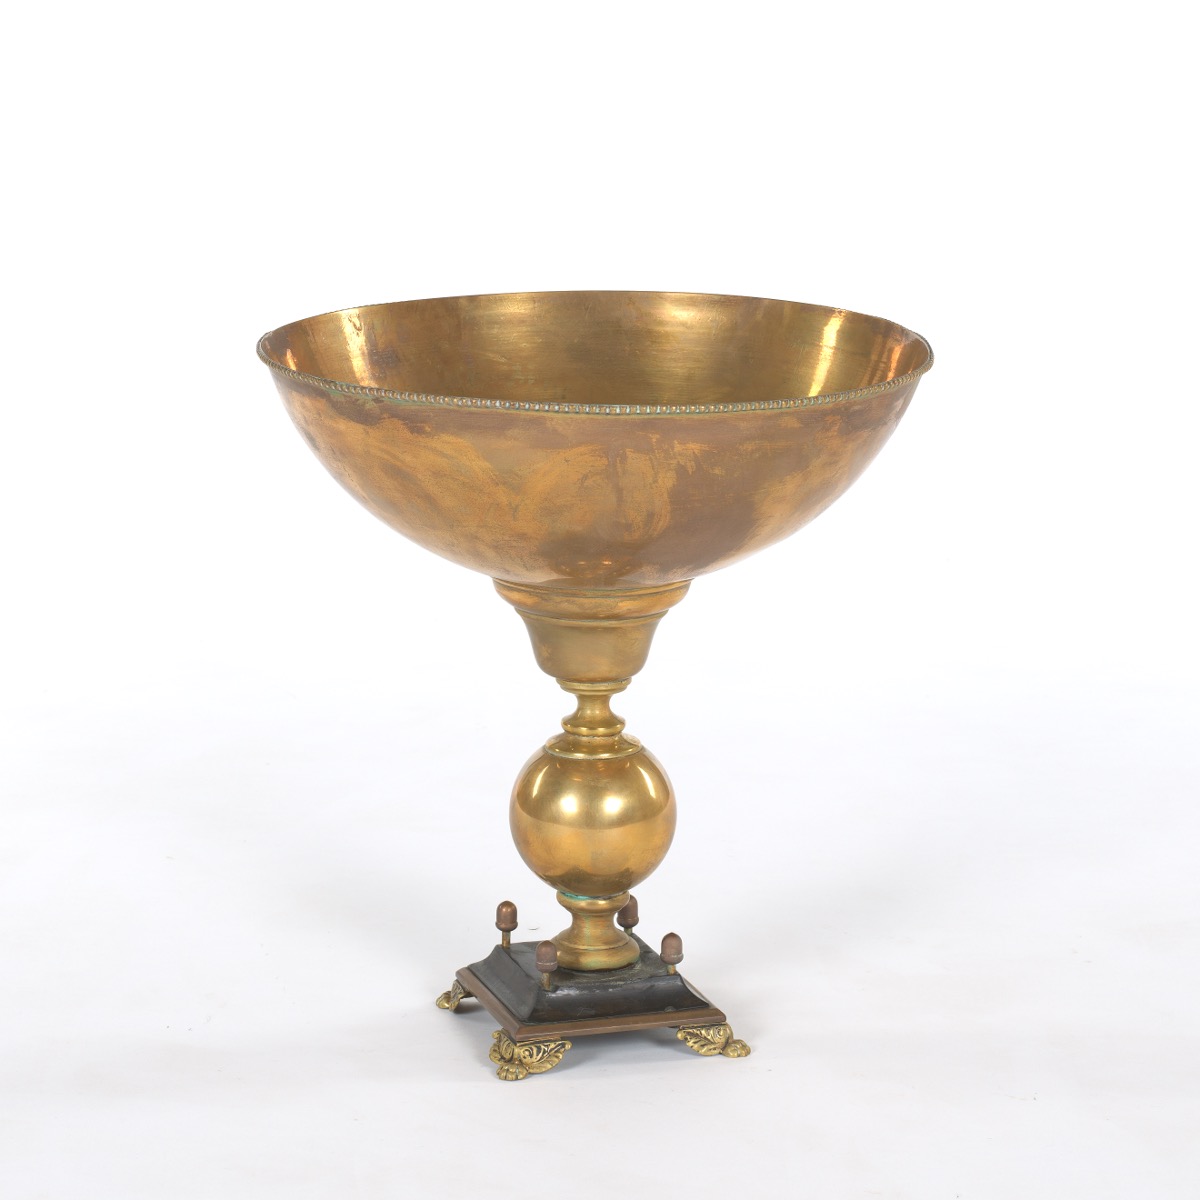 French Patinated Brass and Black Slate Centerpiece Bowl, ca. 19th Century